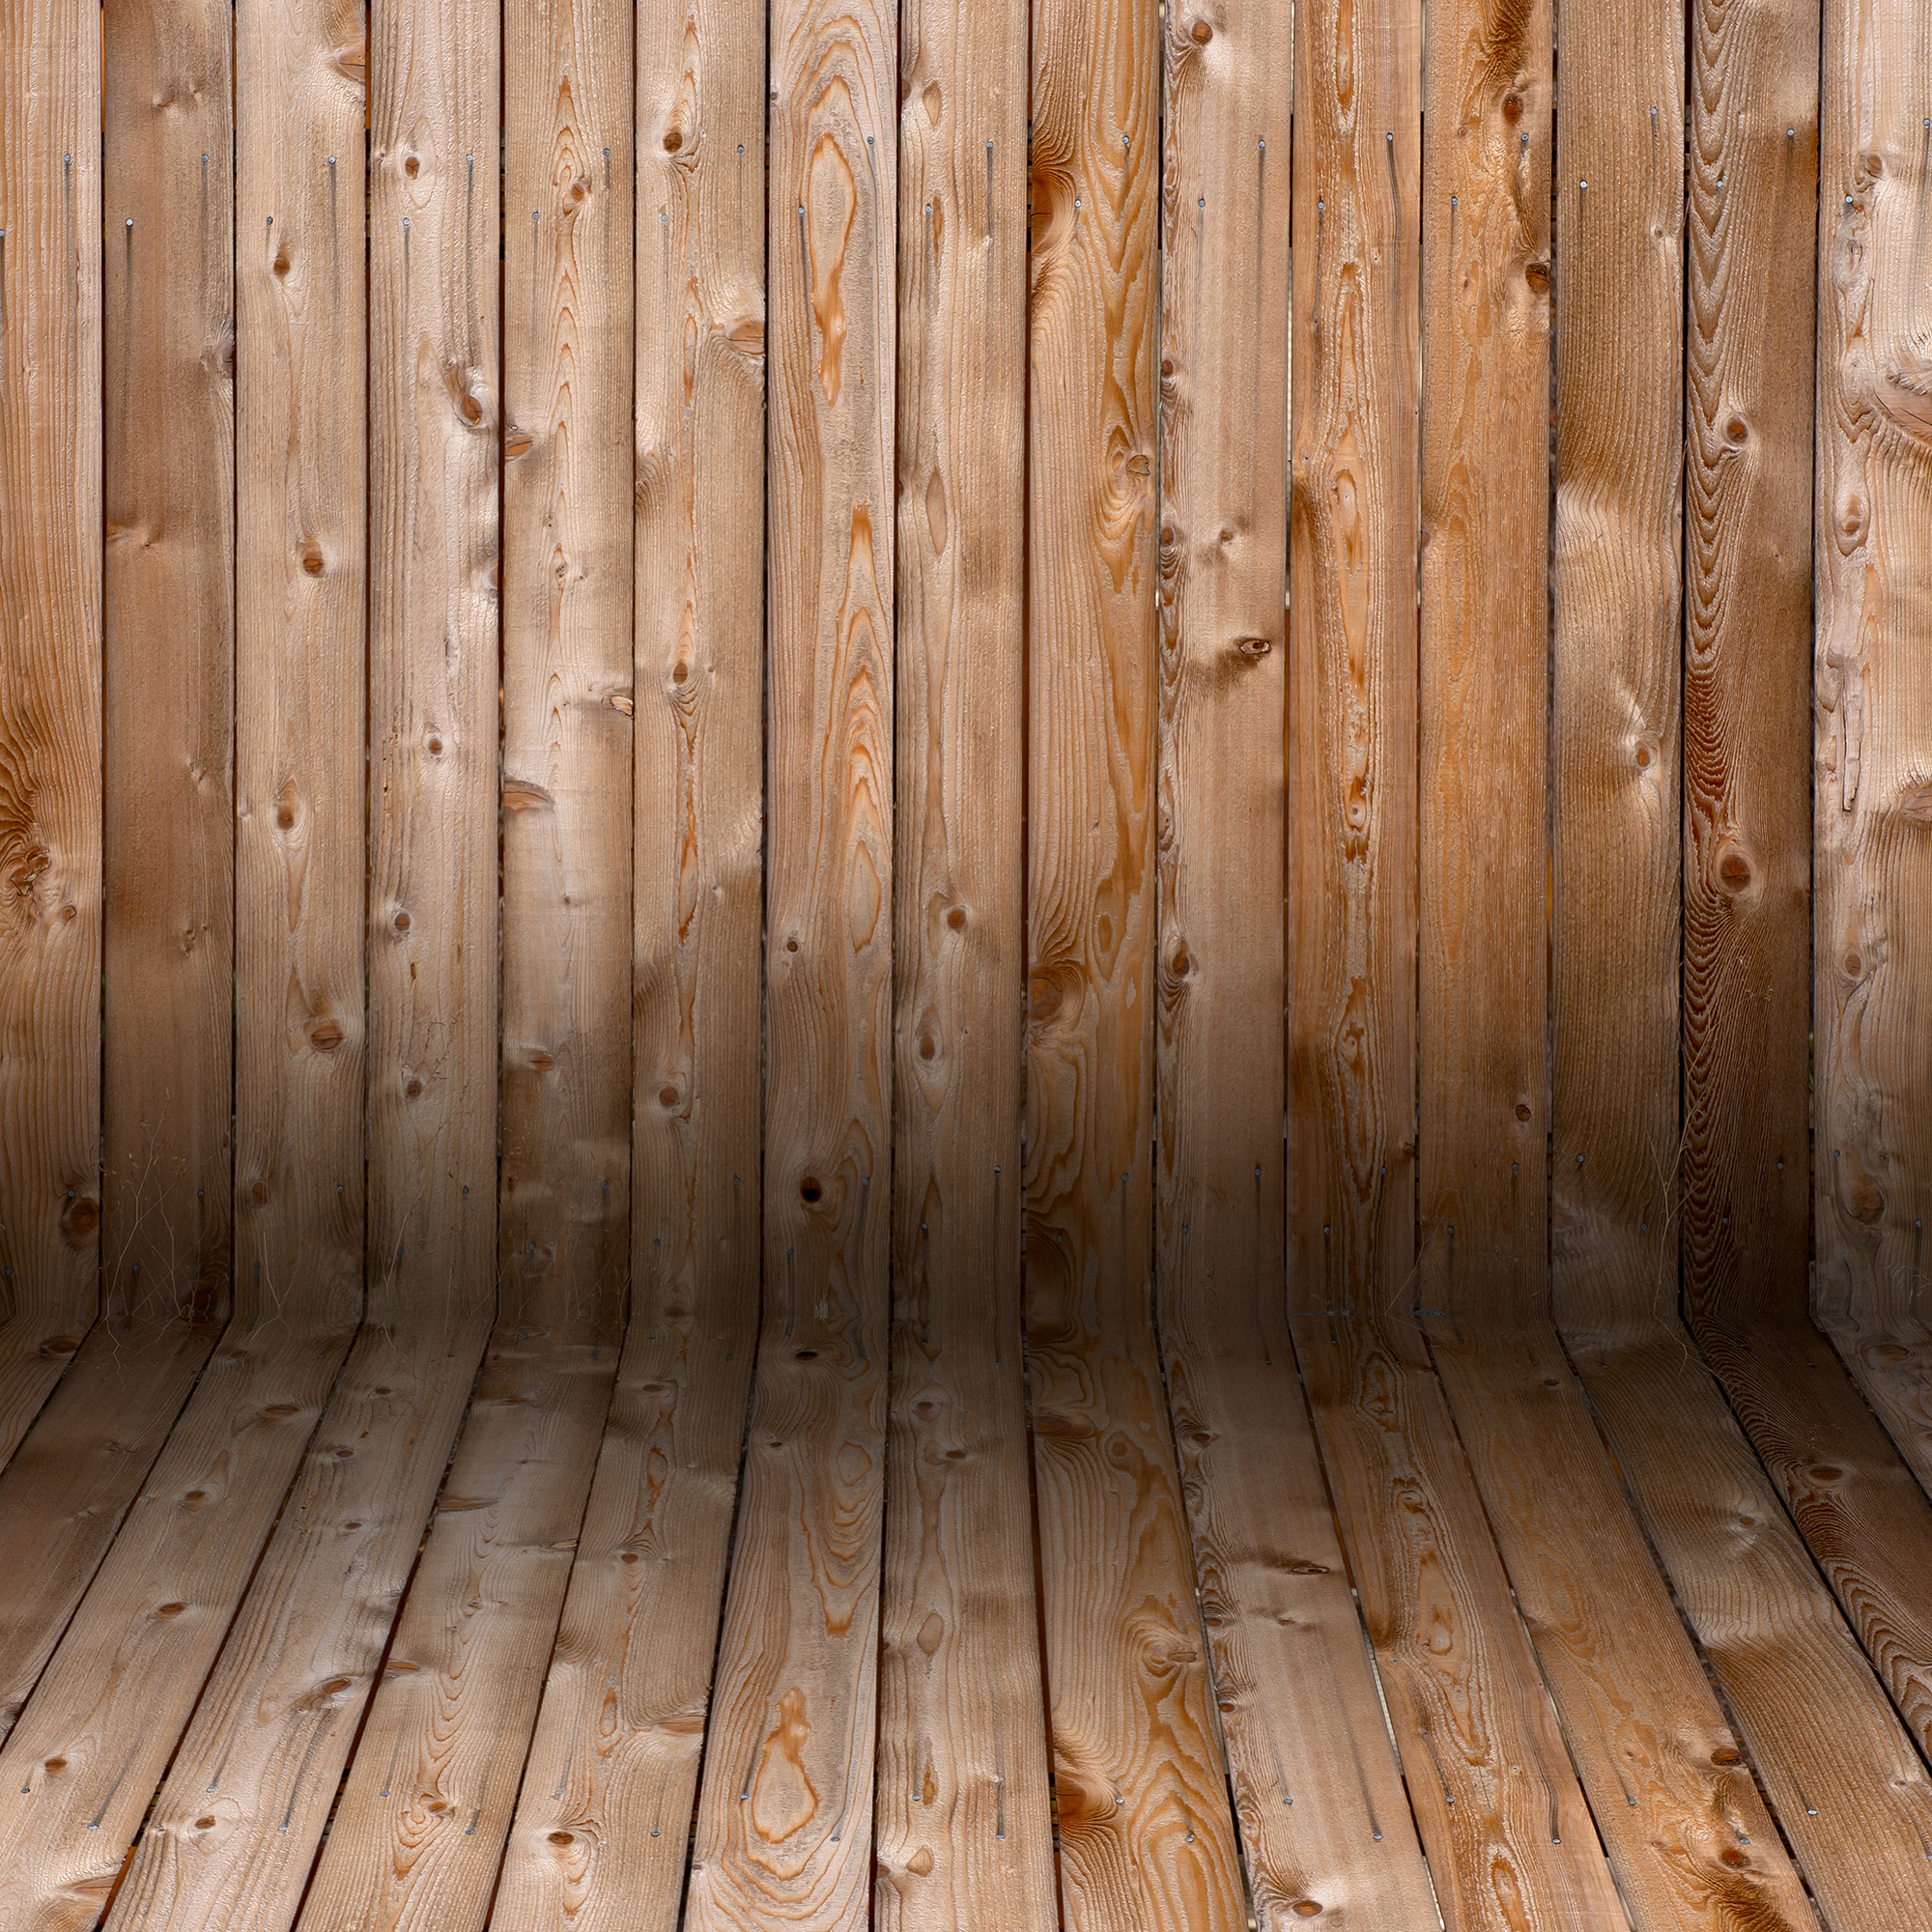 Wooden background 1013tm pic 2736 SouthwindSouthwind